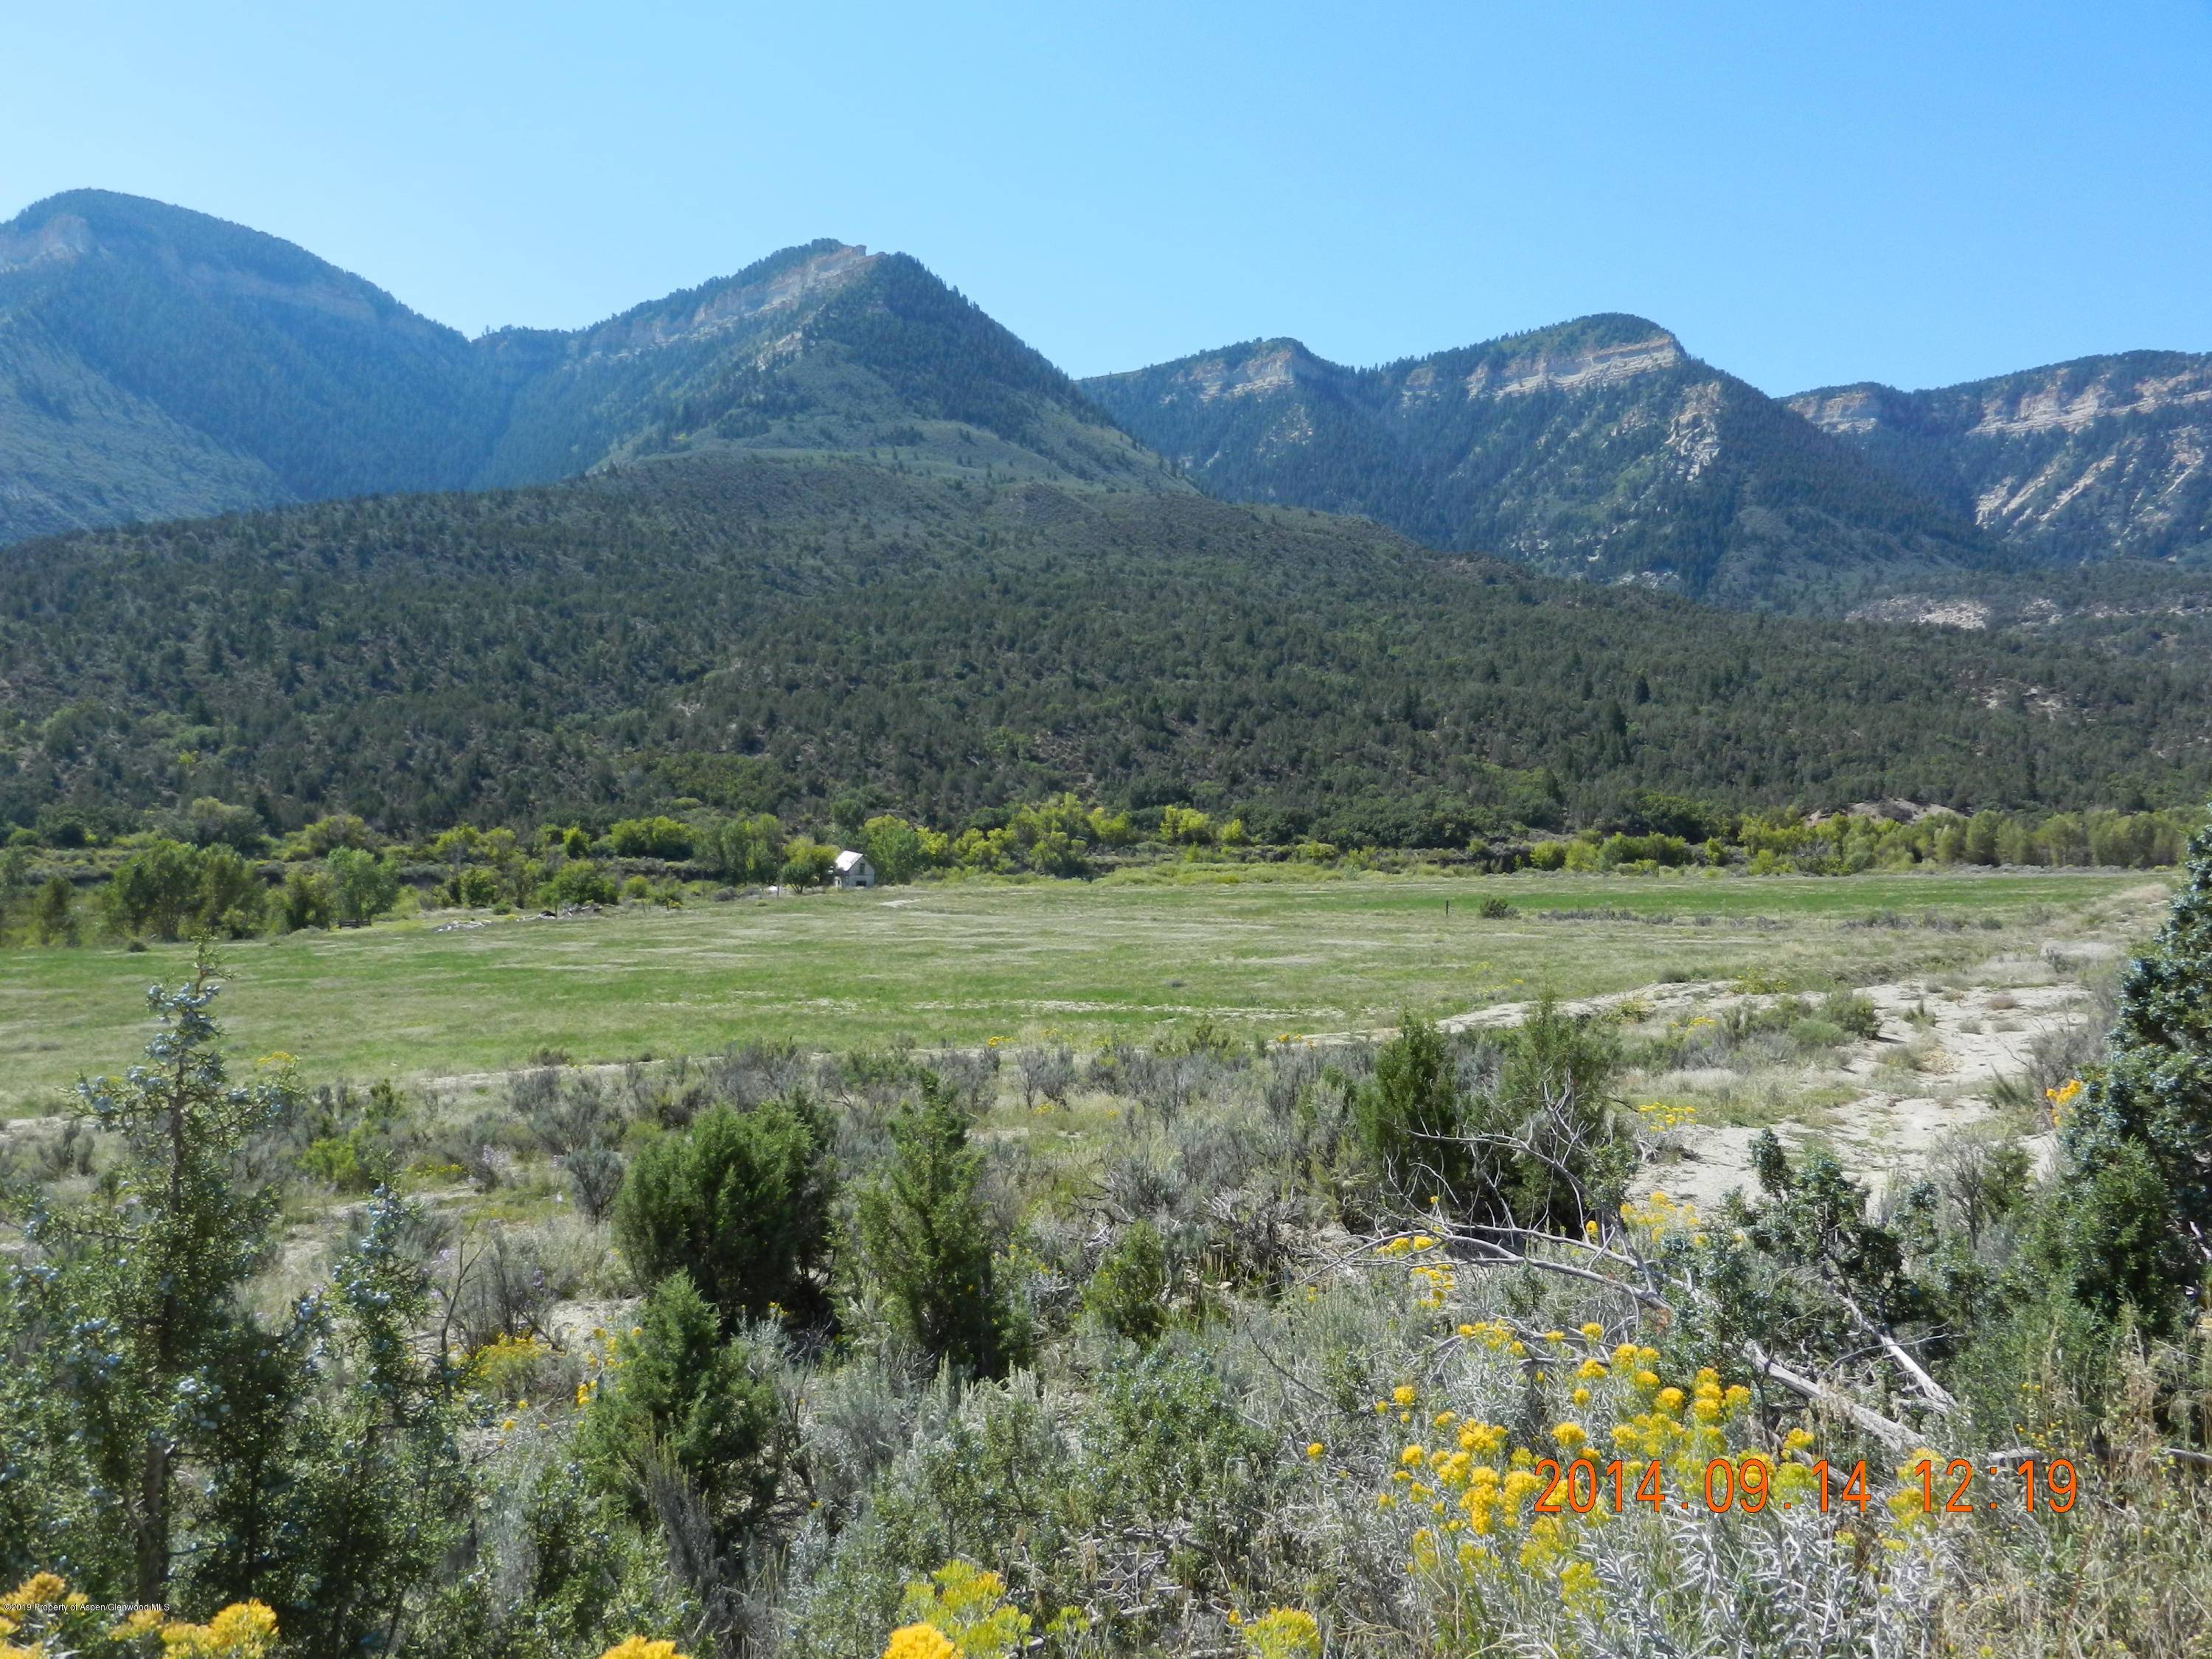 Listing Status PendingAdditional Information Major Area 15 DeBequeComplex Subdivison NoneProperty Subtype Farm RanchCounty GarfieldDirections I 70 to DeBeque Interchange, N on CR 45 45 1 2 to Garco Cty Line ...